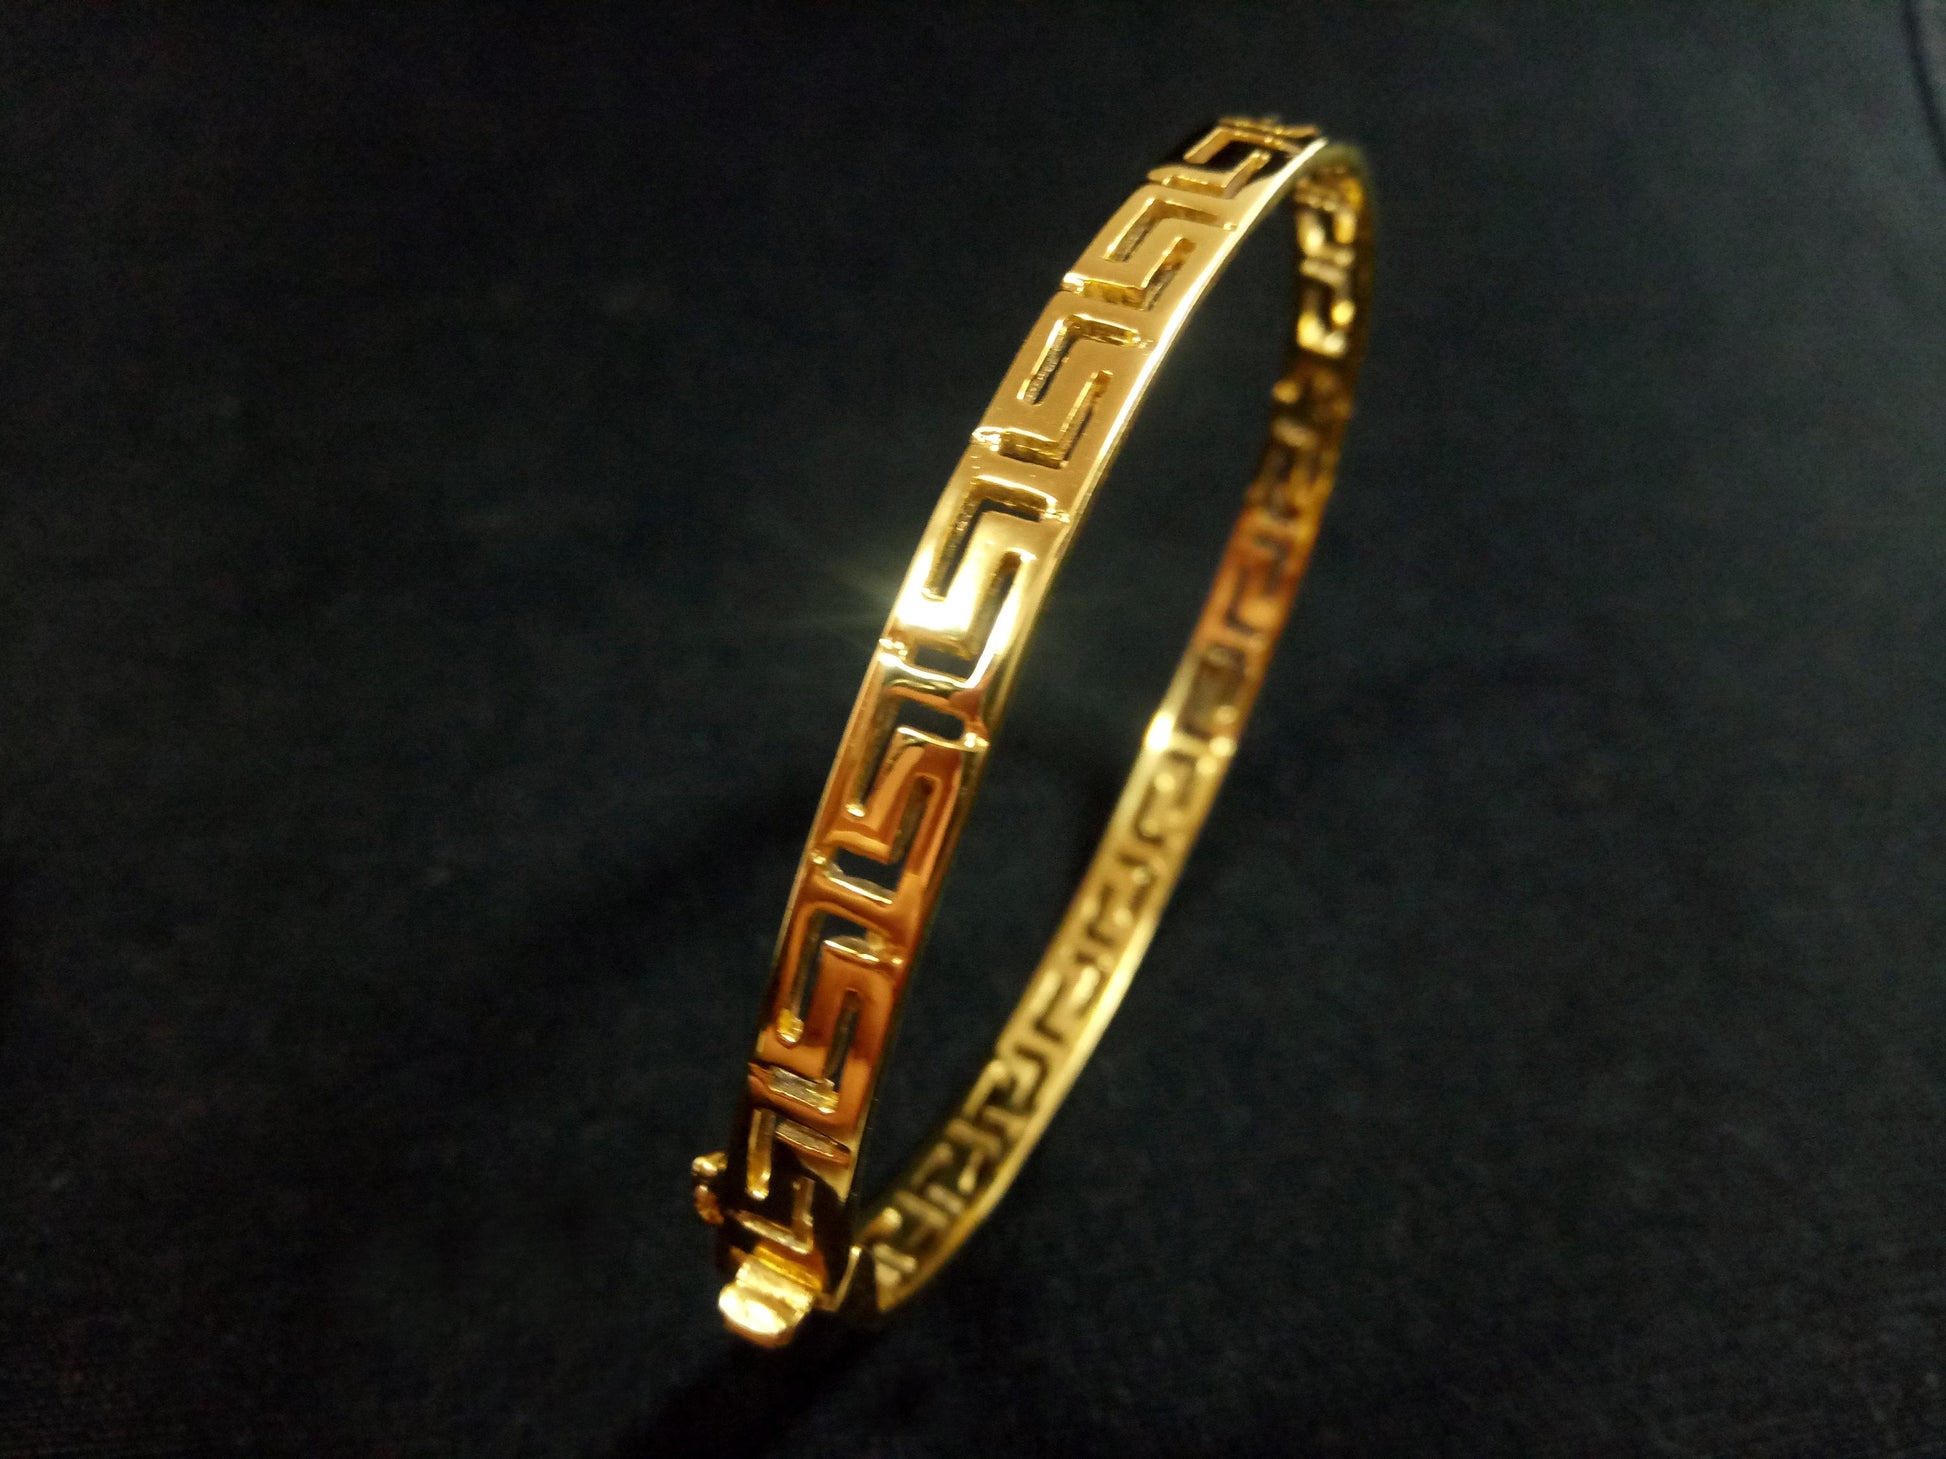 Sterling Silver Greek Key Meander design Gold Plated Cuff Bangle Bracelet, perfect to add a touch of elegance to any outfit